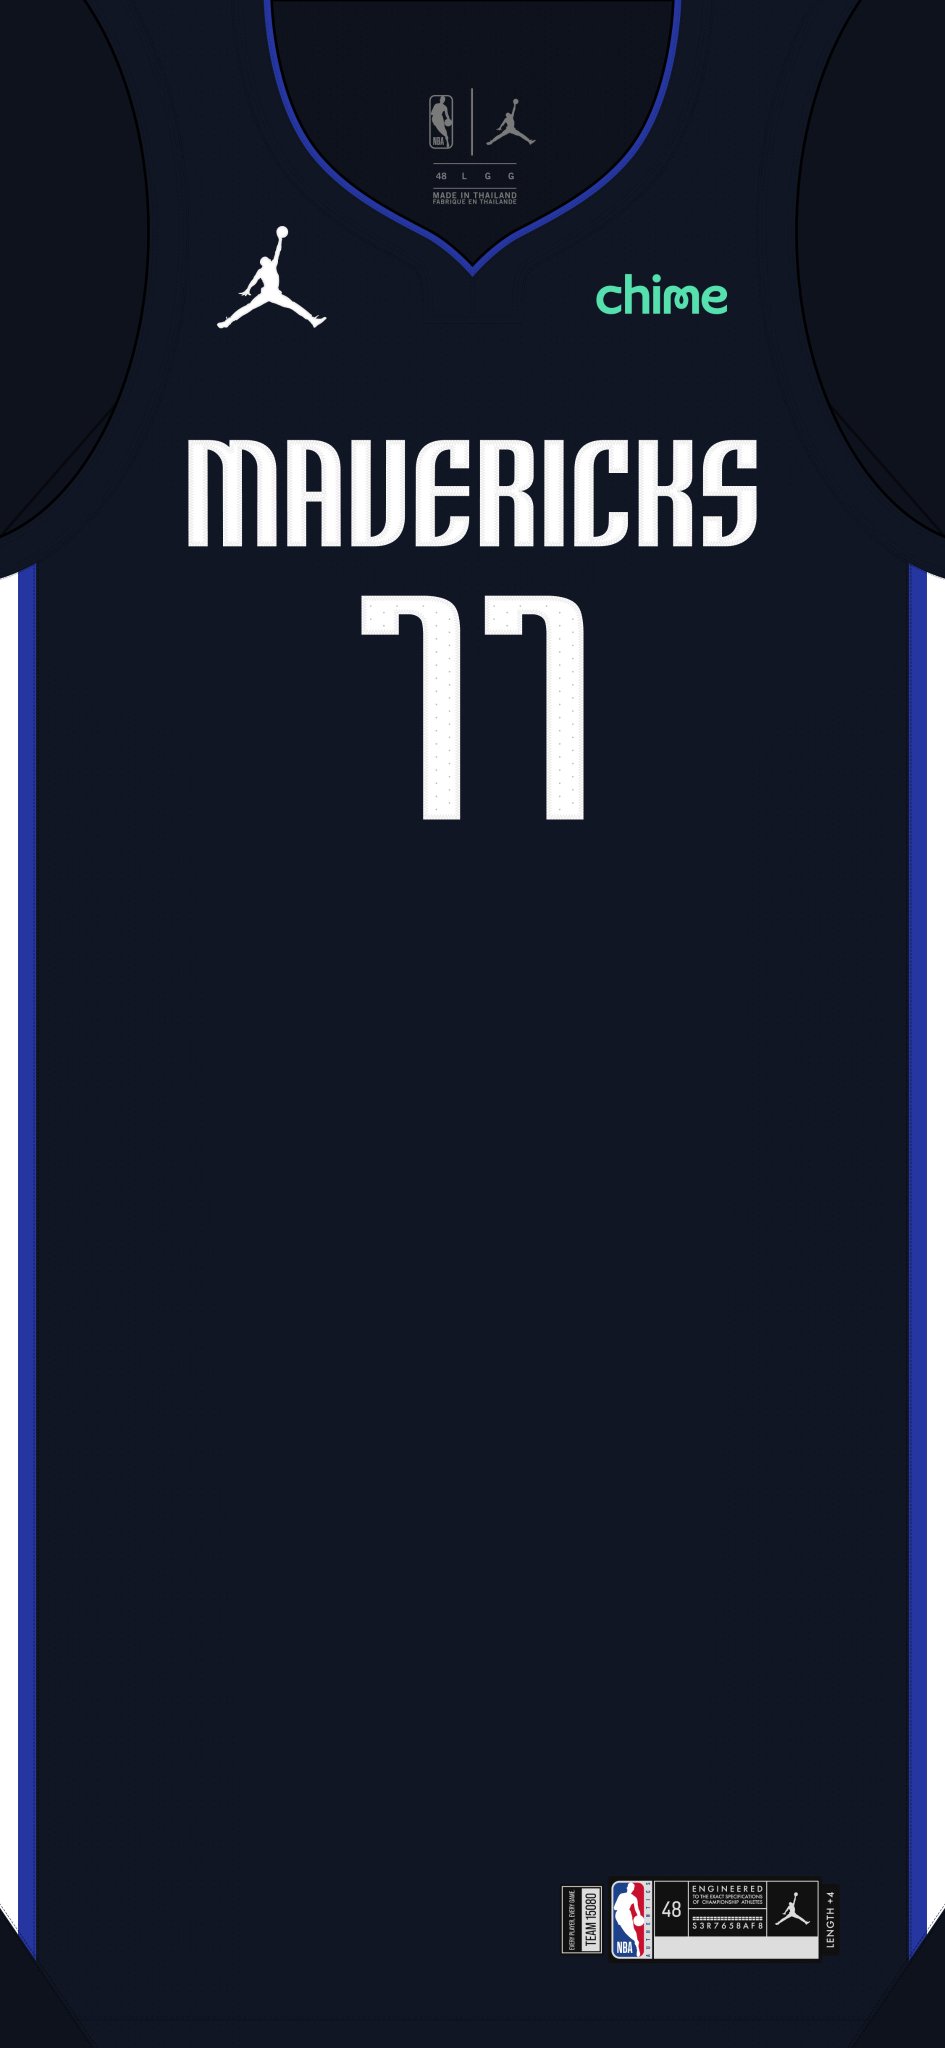 Jordan Liem on X: This looks like a practice jersey. Dallas Mavericks  2019-Present Statement Jersey No. 77 Luka Dončić I complain about Dallas  too much. Sorry, not sorry! For @harry_9787885 #NBA #NBATwitter #